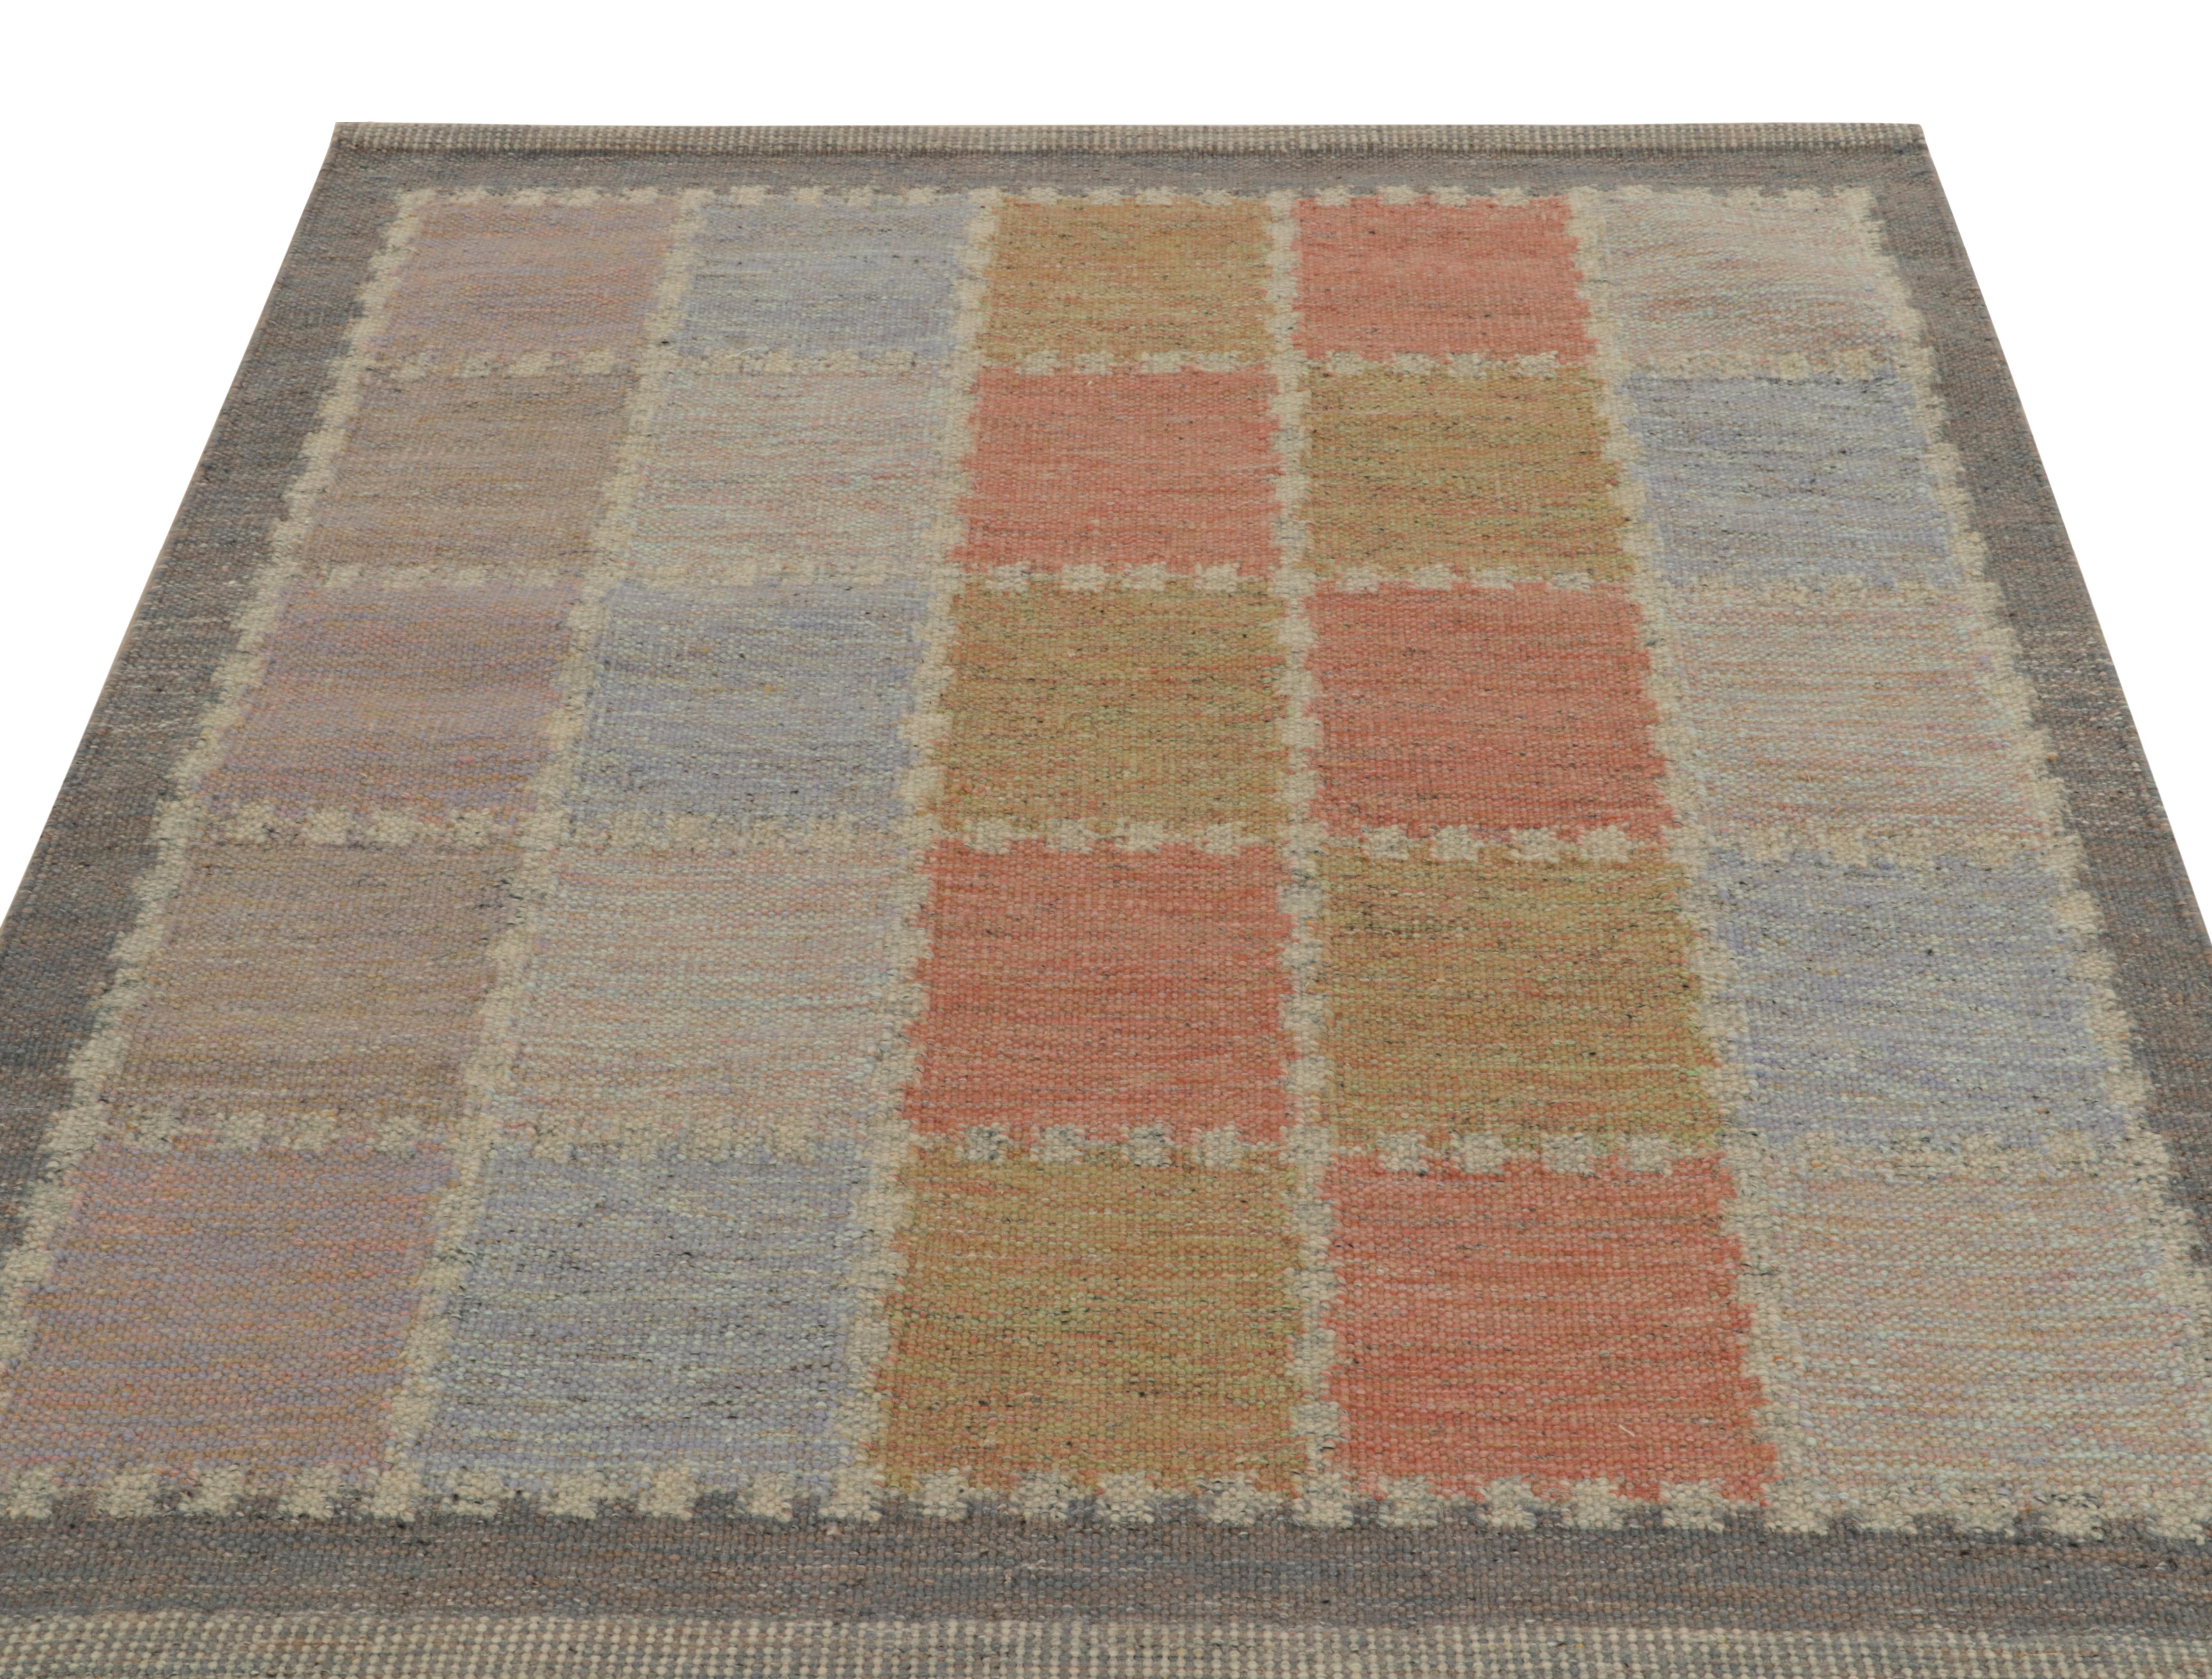 Handwoven in wool, a smart Scandinavian style kilim rug from our award-winning flatweave selections of the titular collection. The almost square size graph witnesses a symmetric geometric pattern in handsome gray, light blue, ochre and pink-red for